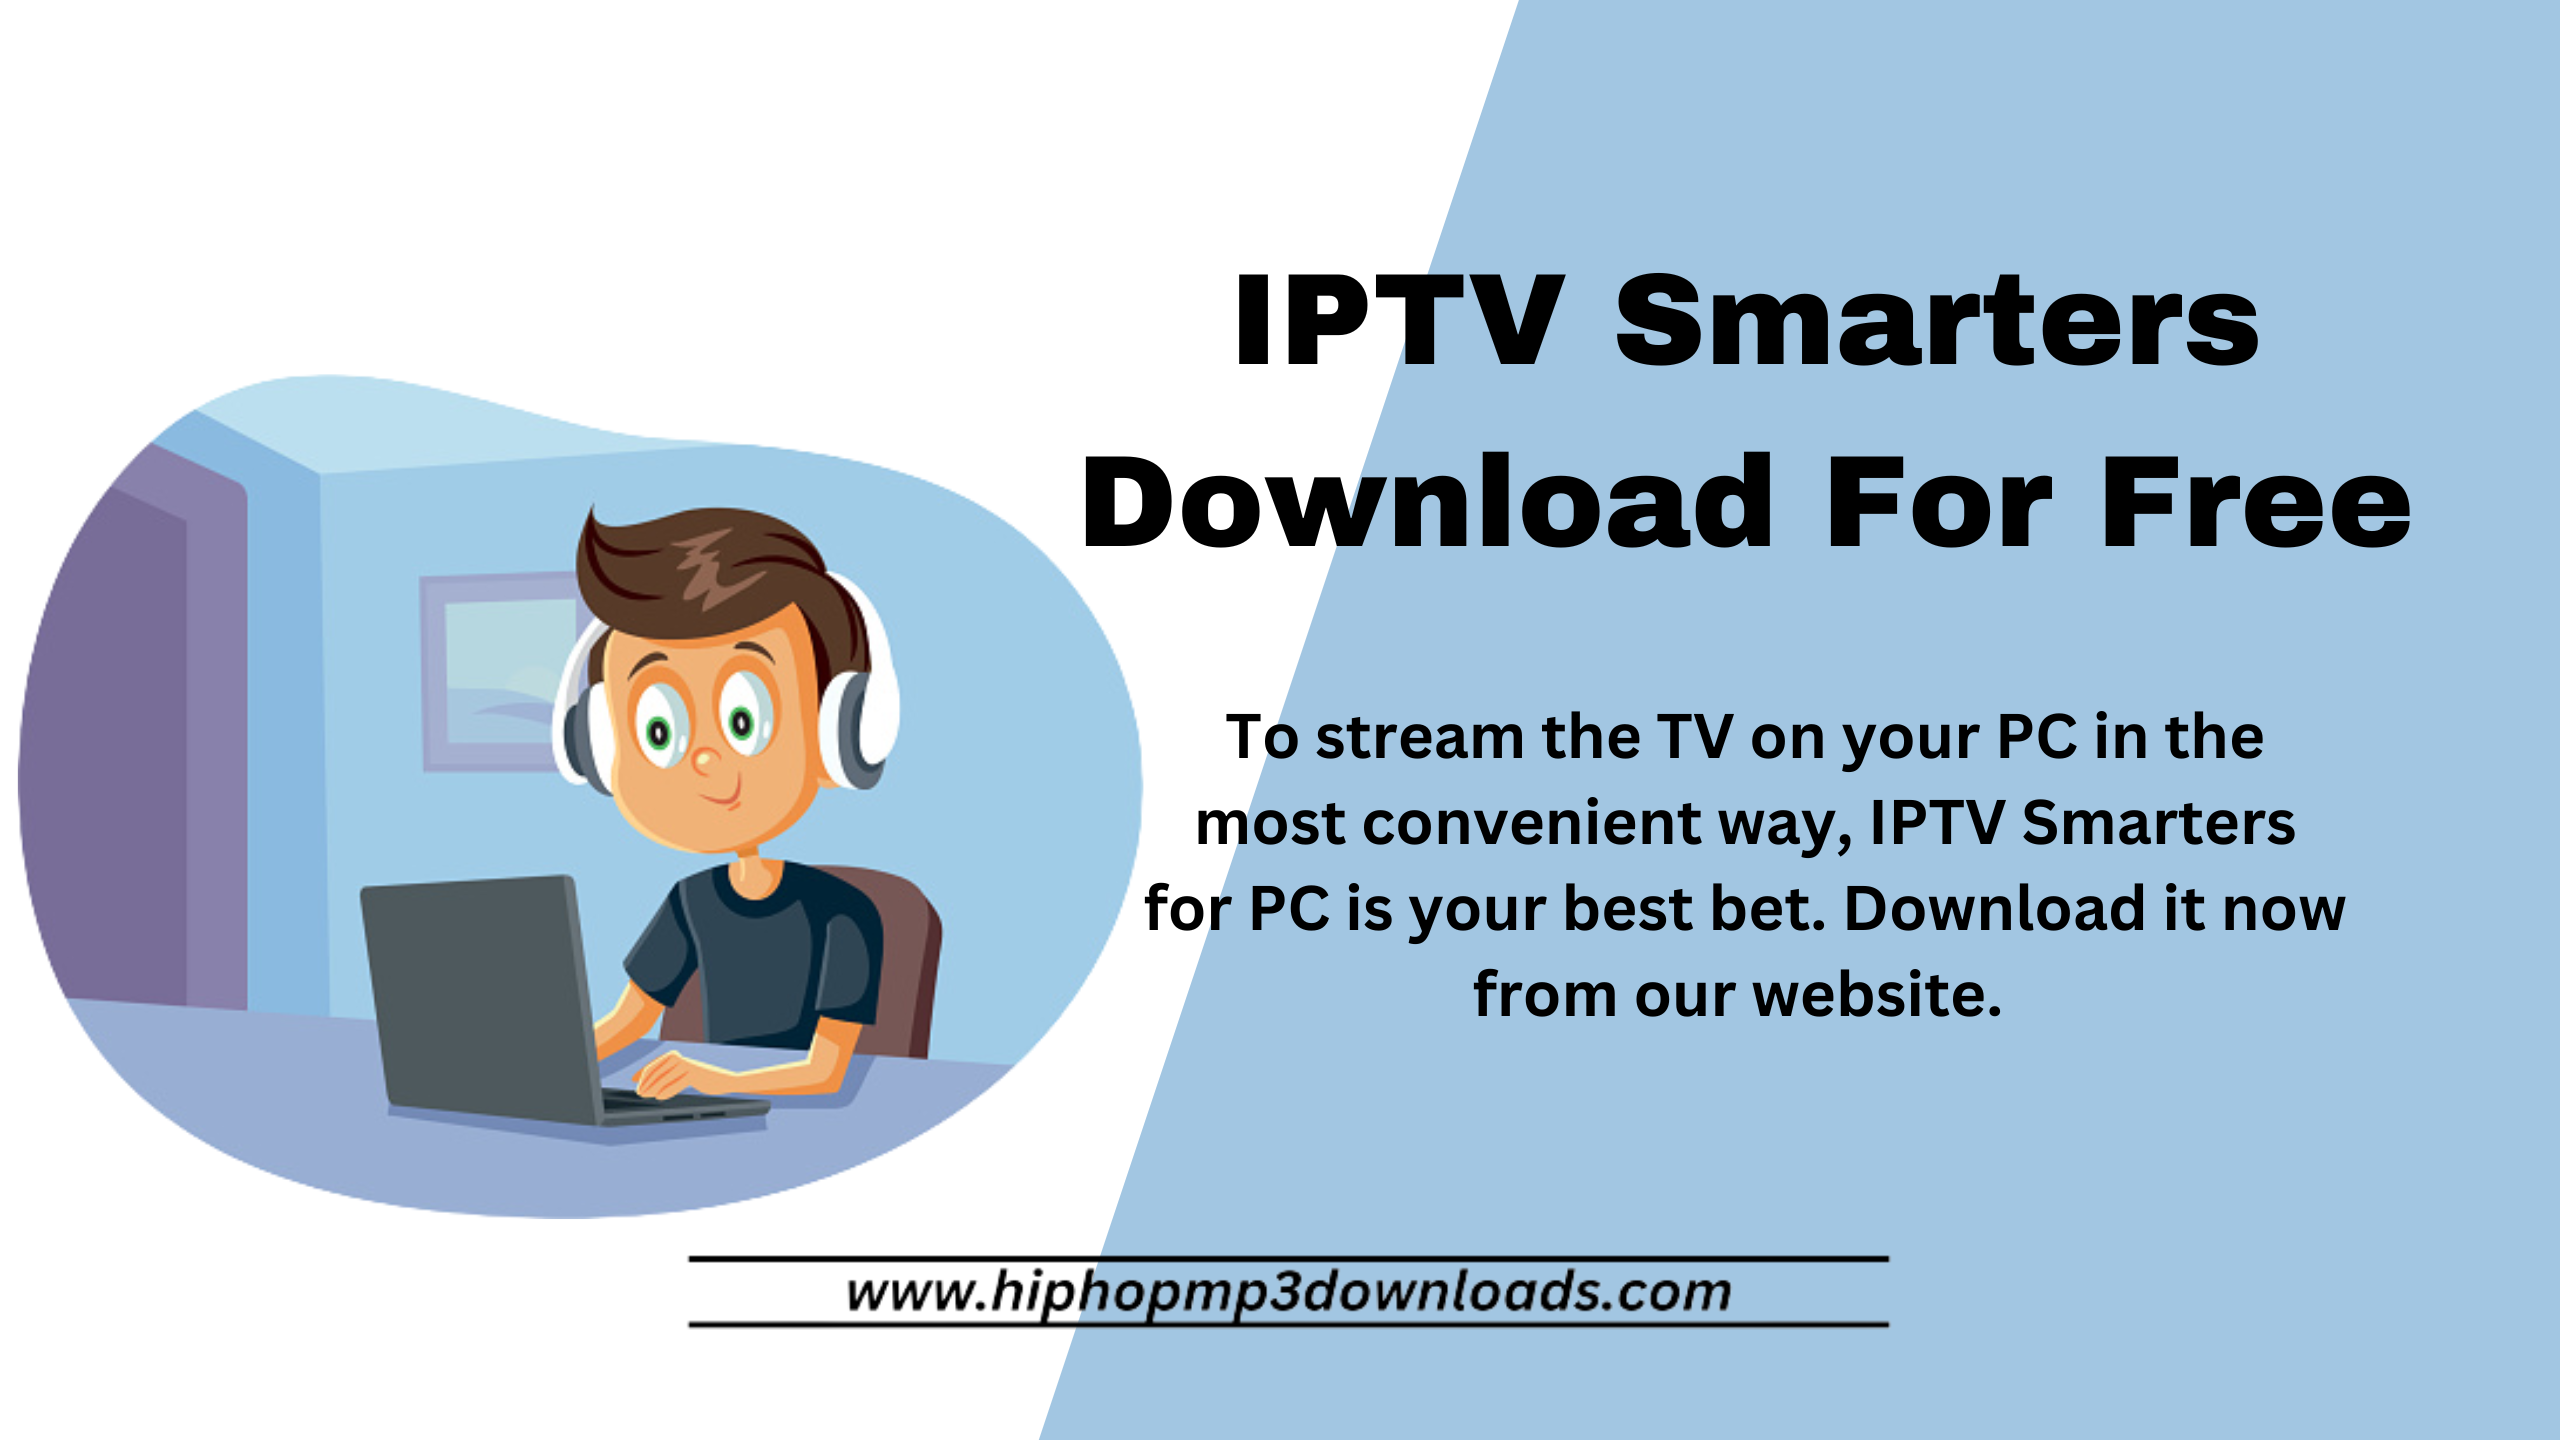 IPTV Smarters Download For Free